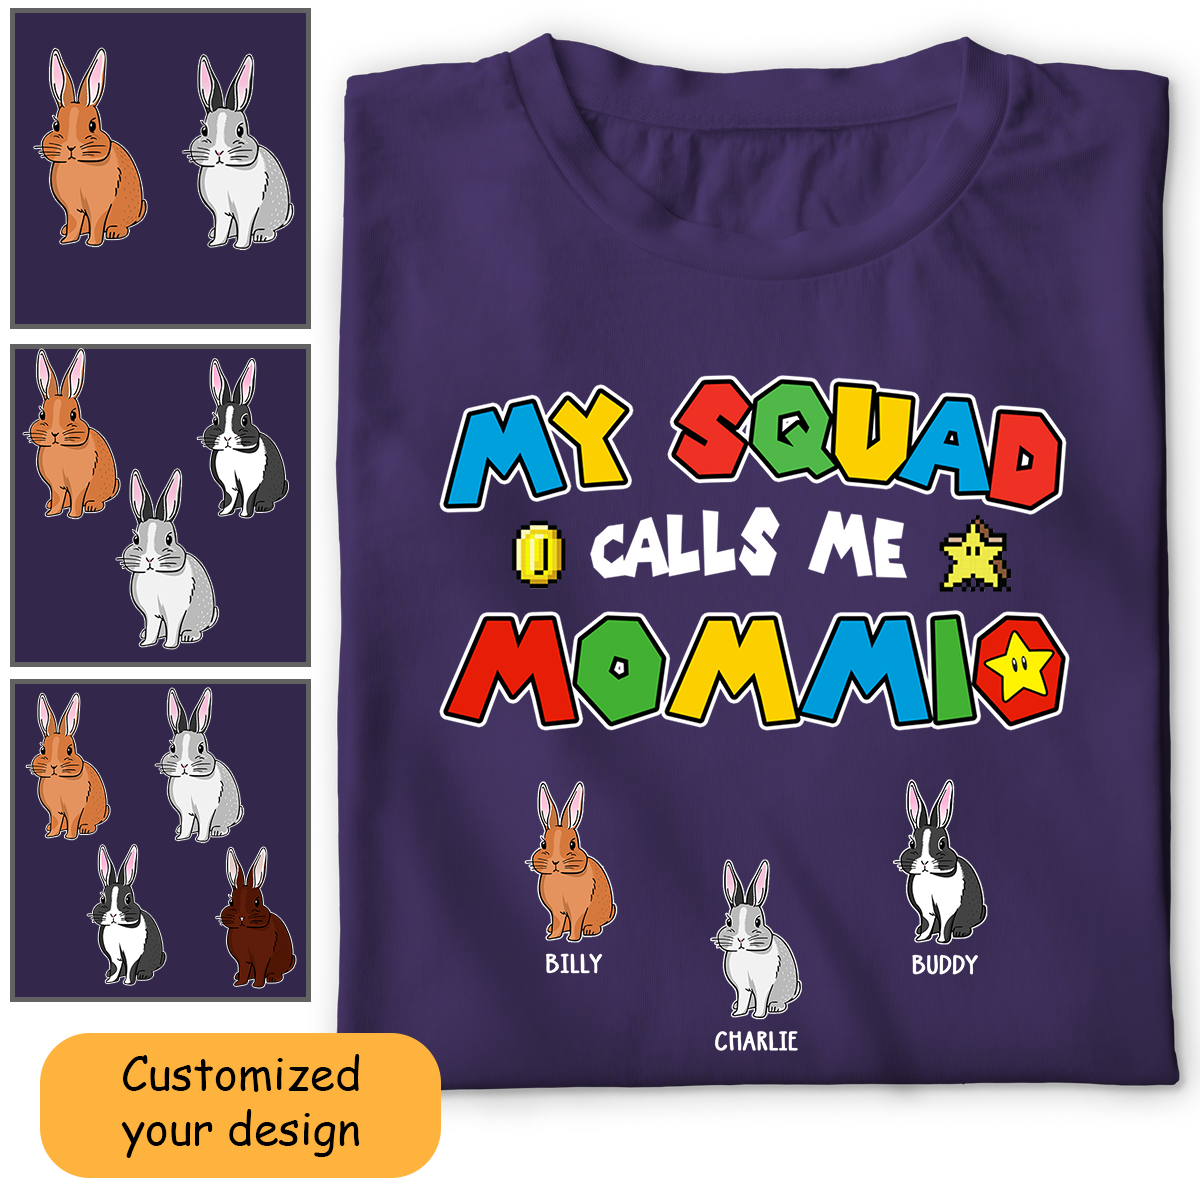 Rabbit Mom Customized Shirt My Squad Calls Me Mommio For Mom, Mother, Grandma, Wife, Mother's Day Gift, For Rabbit Lovers